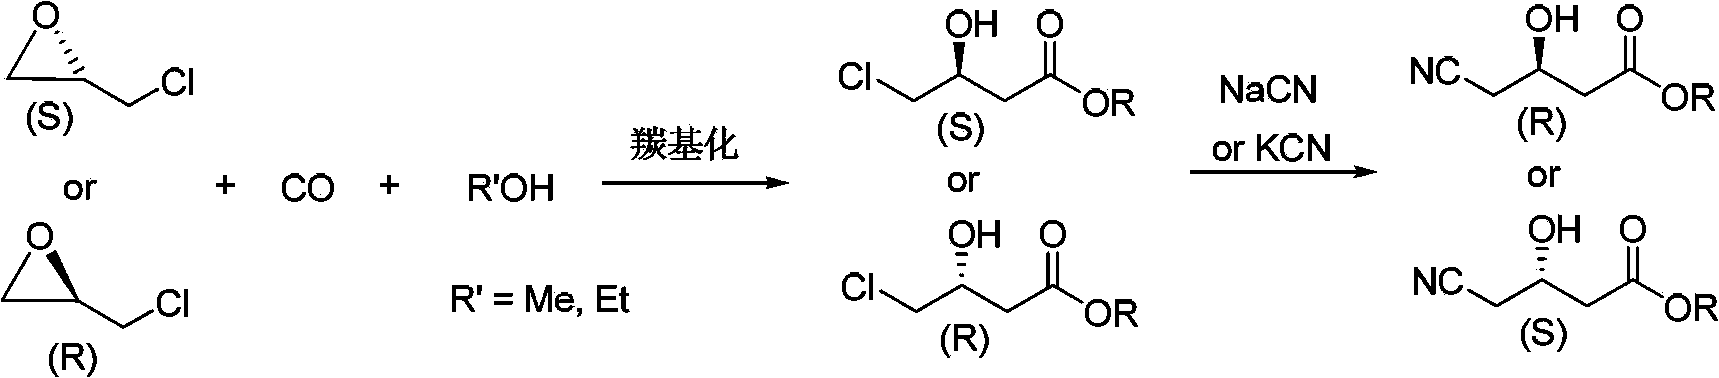 Preparation method for chiral 4-cyano-3-hydroxybutyrate